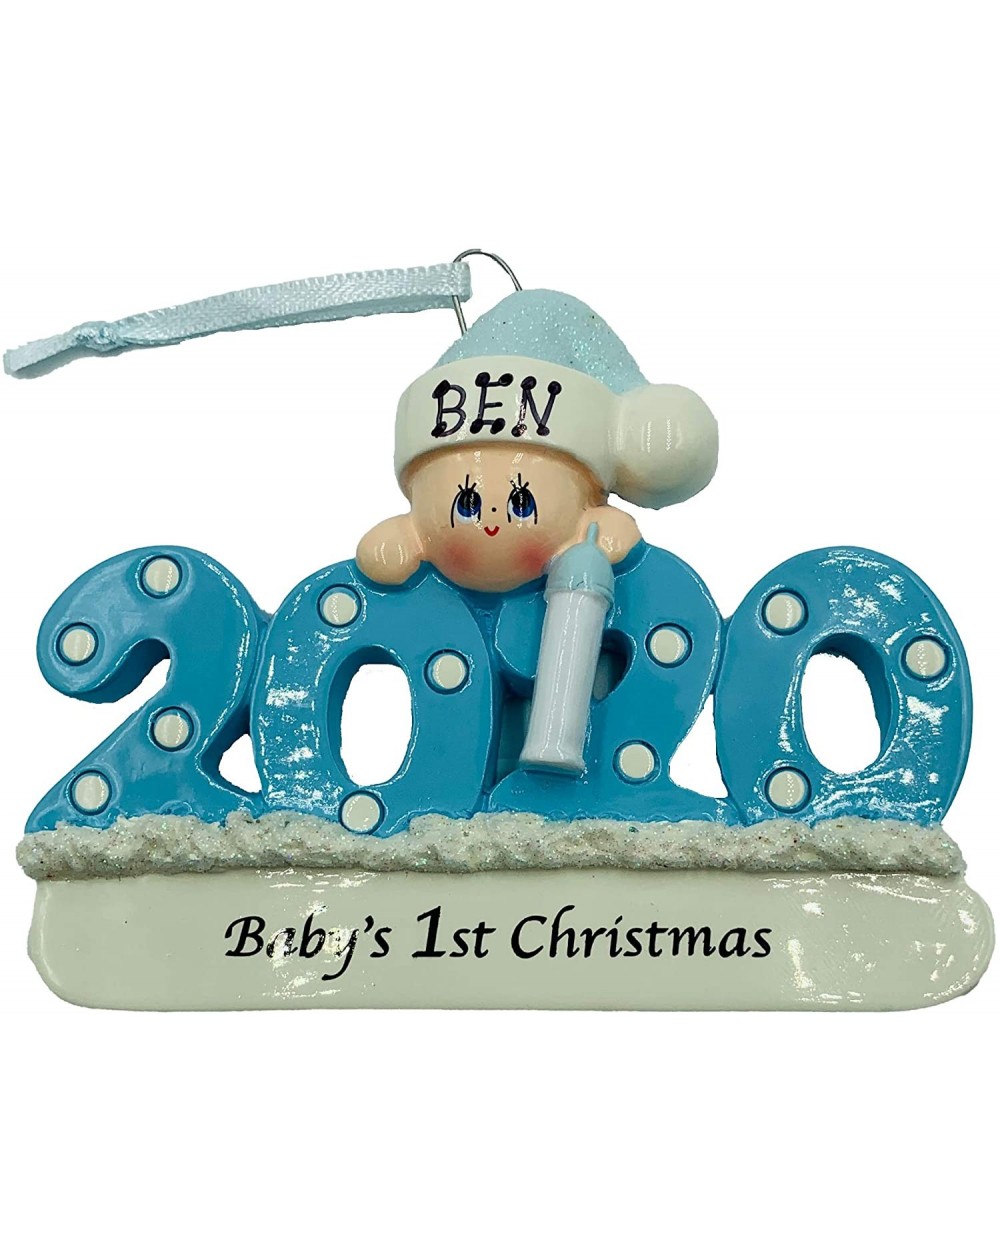 Ornaments Personalized Baby's First Christmas Ornament 2020 Blue/boy Free Personalization - C9128G7FIRZ $13.16